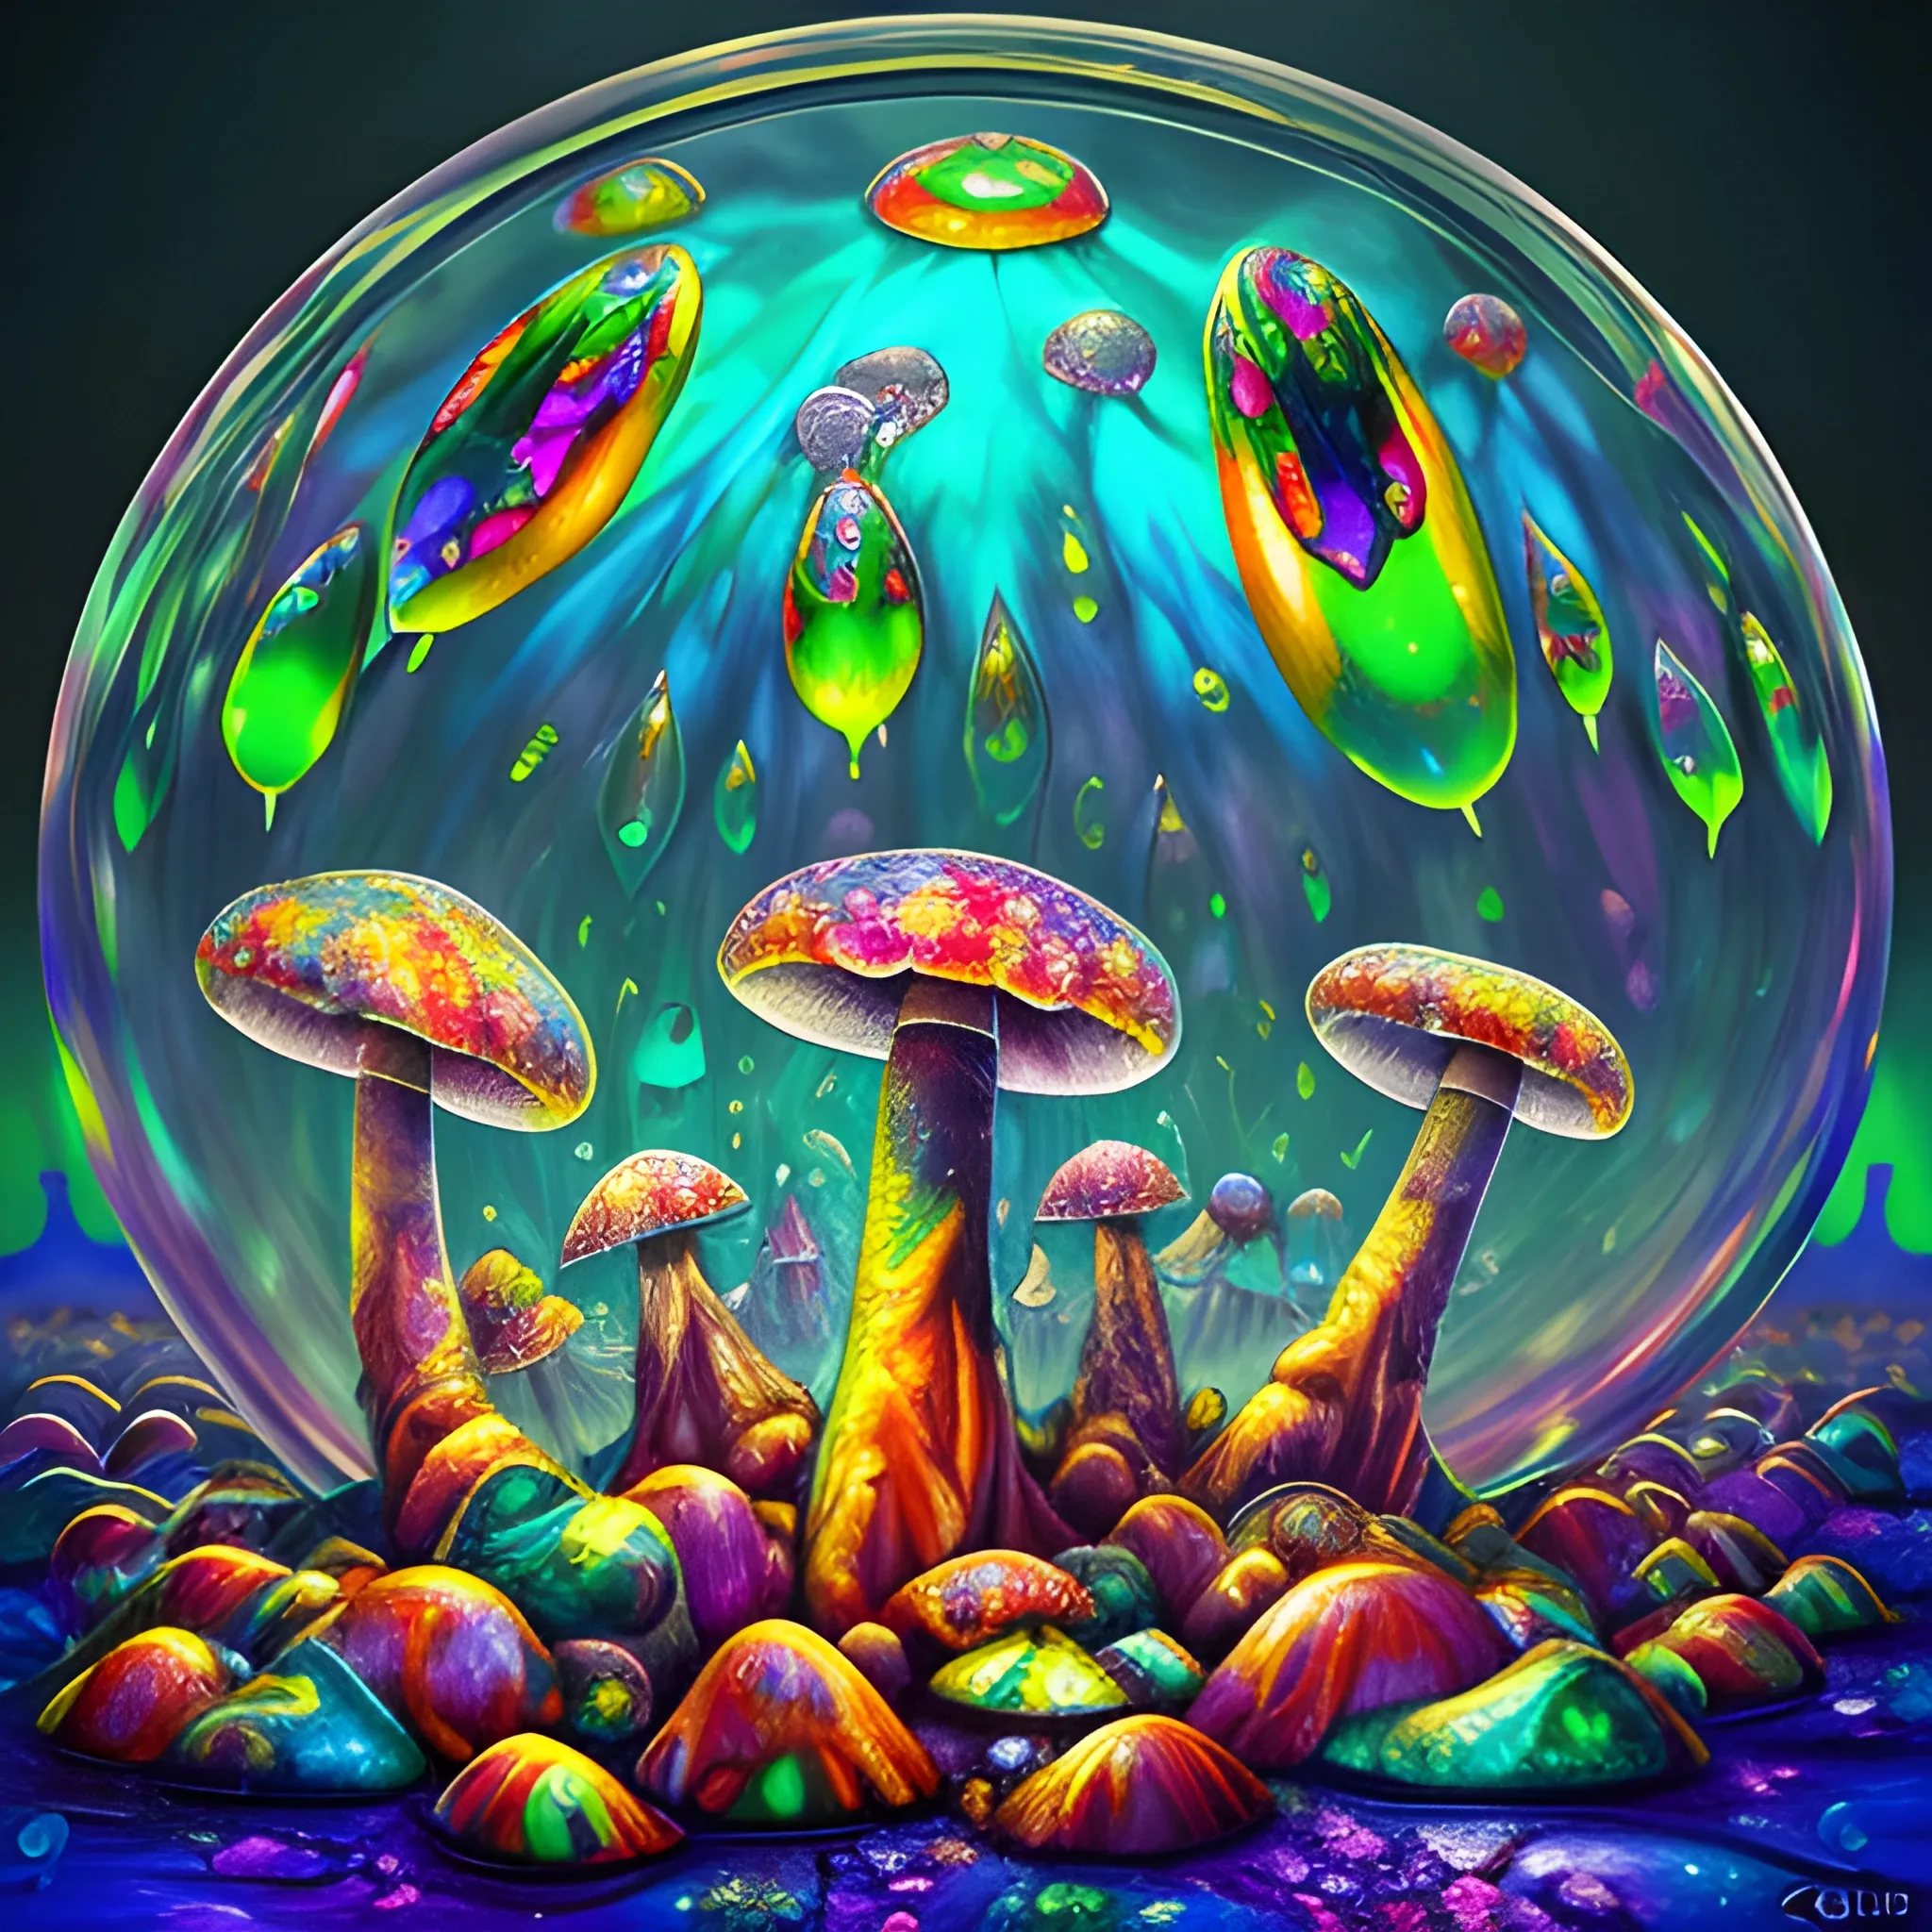 many crystal crazy mushrooms with human face, crystal frogs around, many broken glass in the air, saturated colors, surrealism, chaotic background, 3D, Trippy,  eerie atmosphere, close up, Oil Painting, angular perspective 